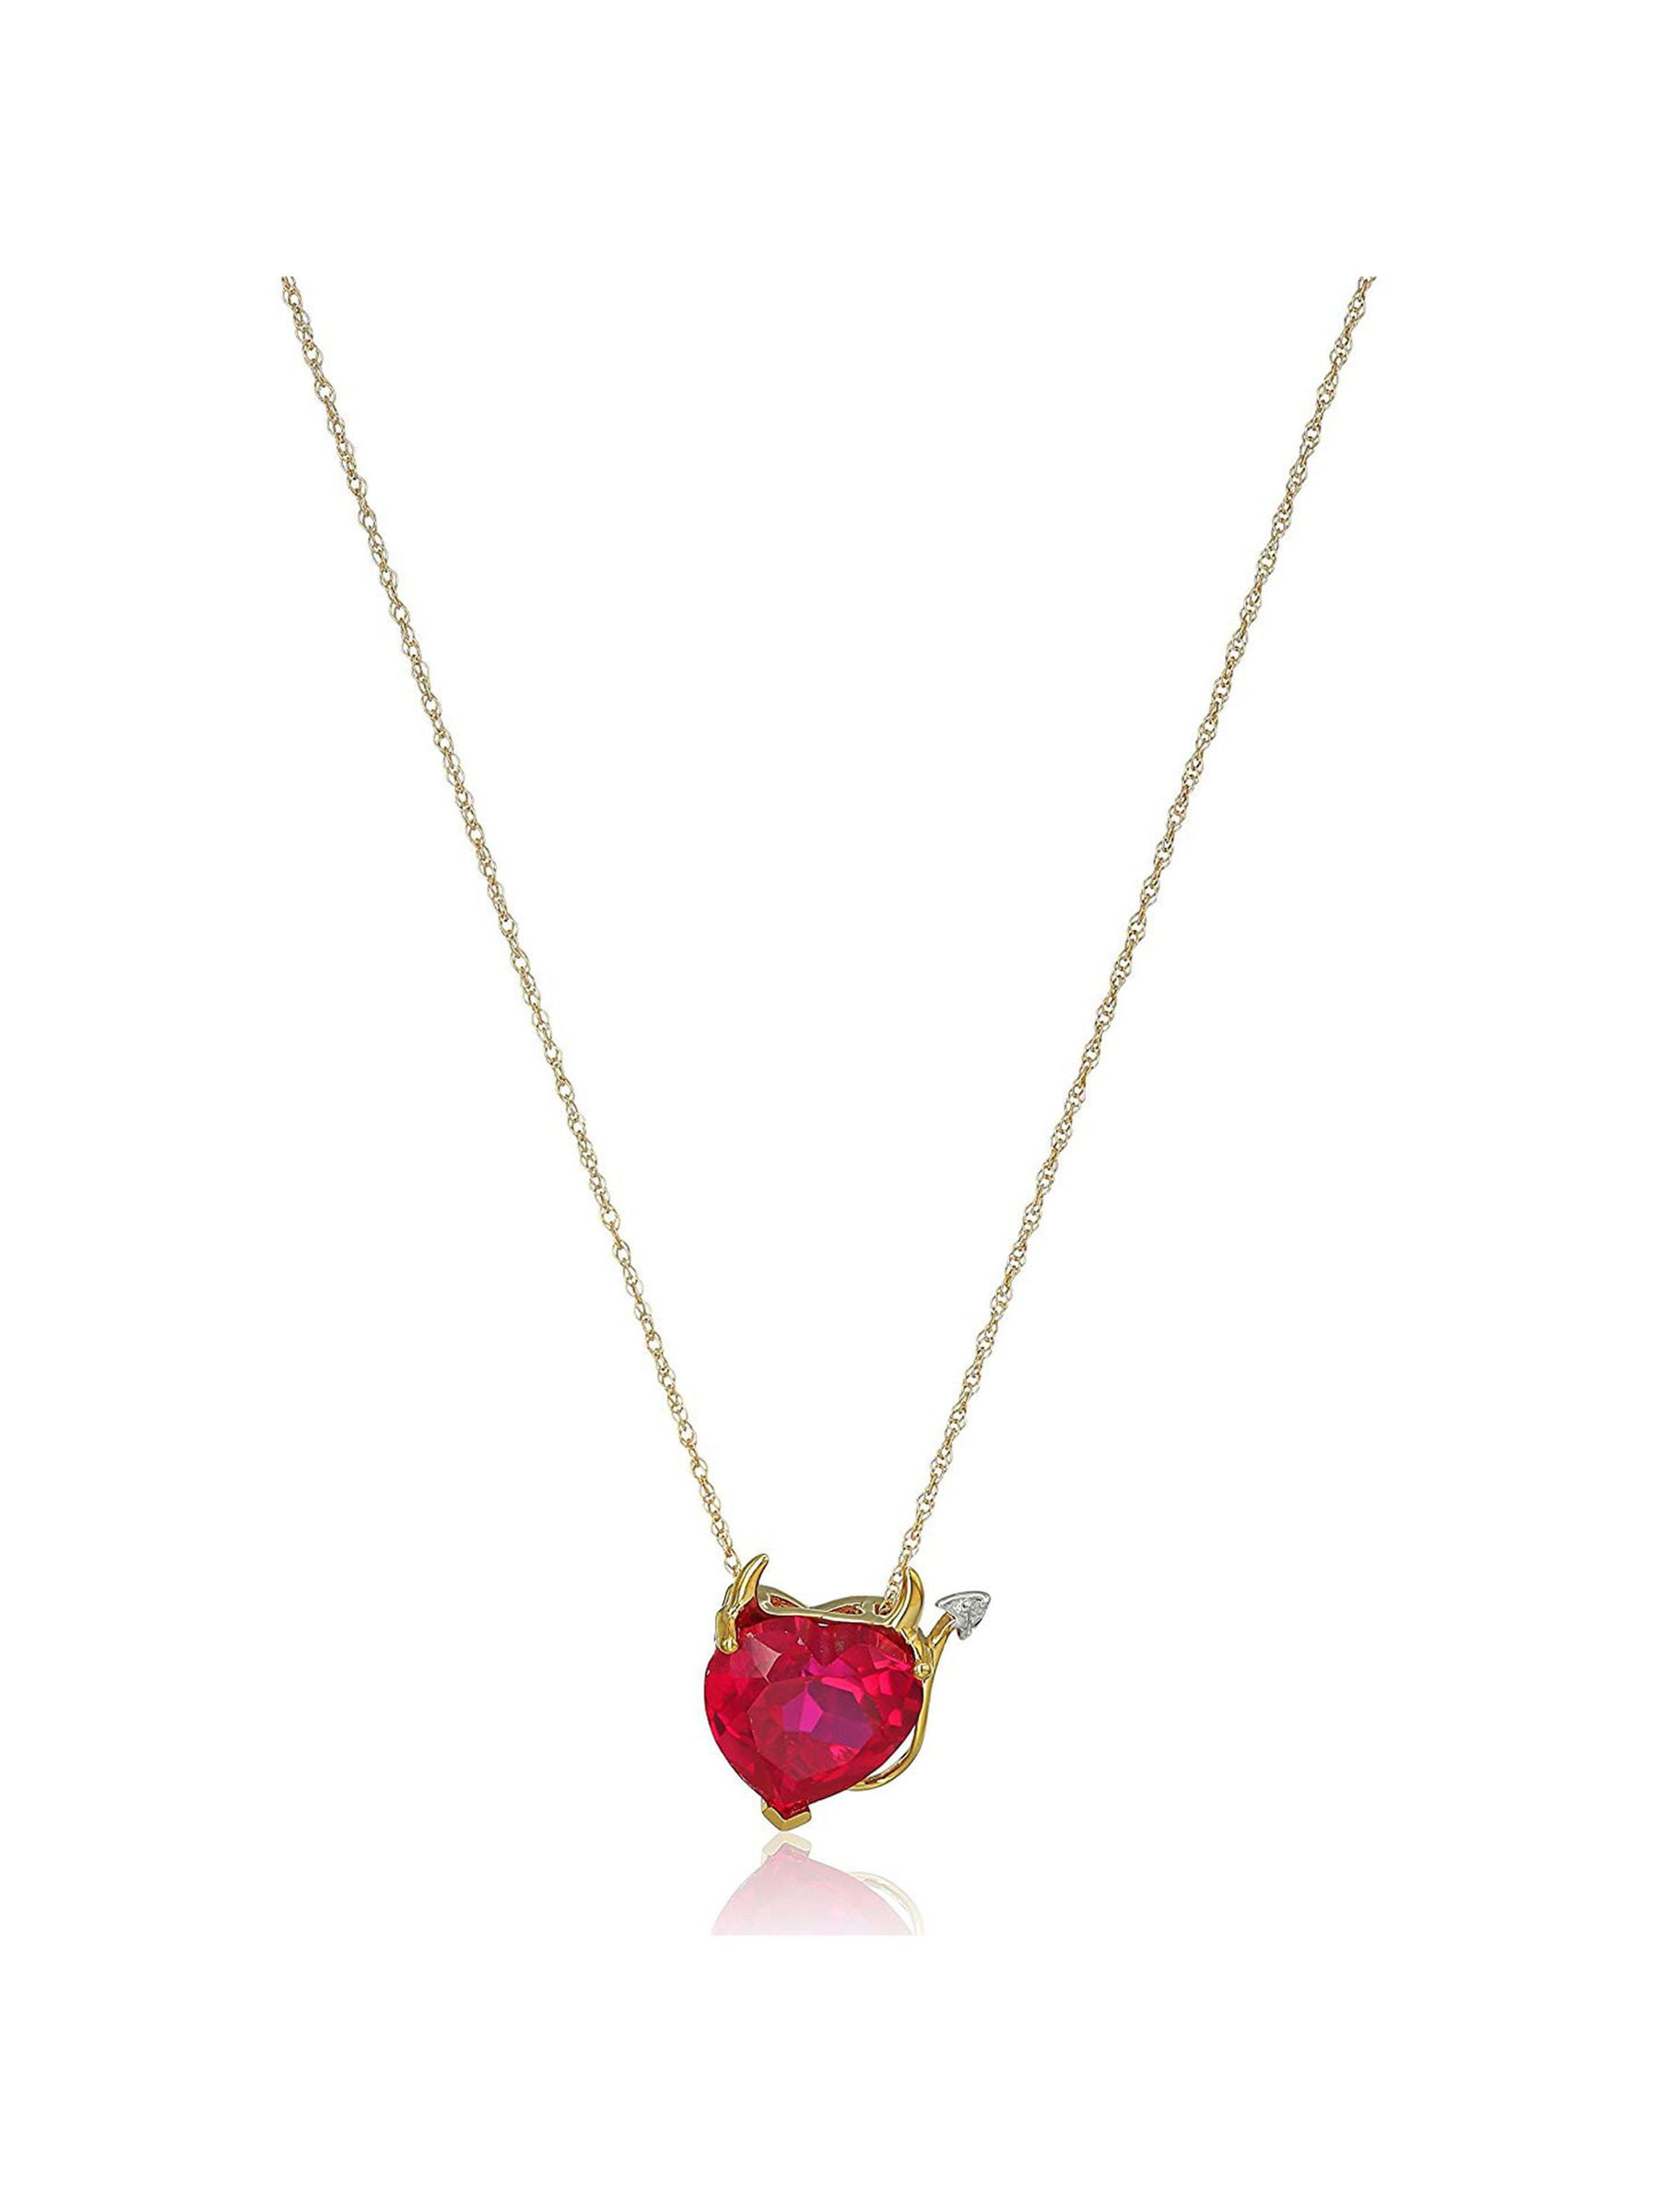 Craft On Jewelry Double Heart Simulated Ruby Pendant Necklace Her 14k Gold Plated